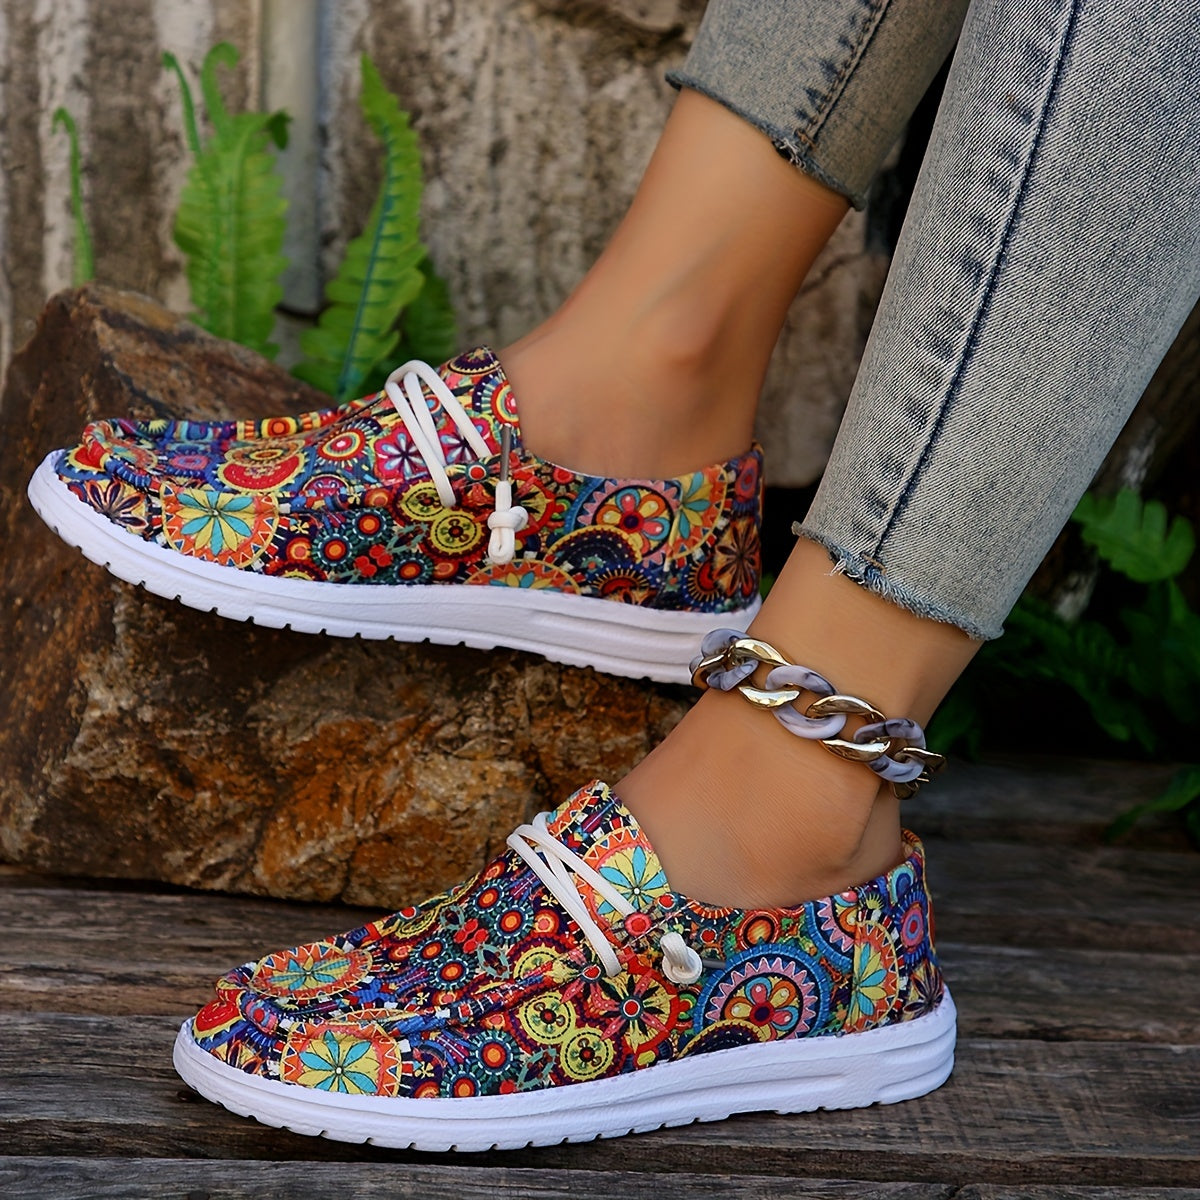 Women's Colorful Pattern Canvas Shoes, Slip On Low-top Round Toe Lightweight Non-slip Flat Shoes, Comfy Daily Shoes